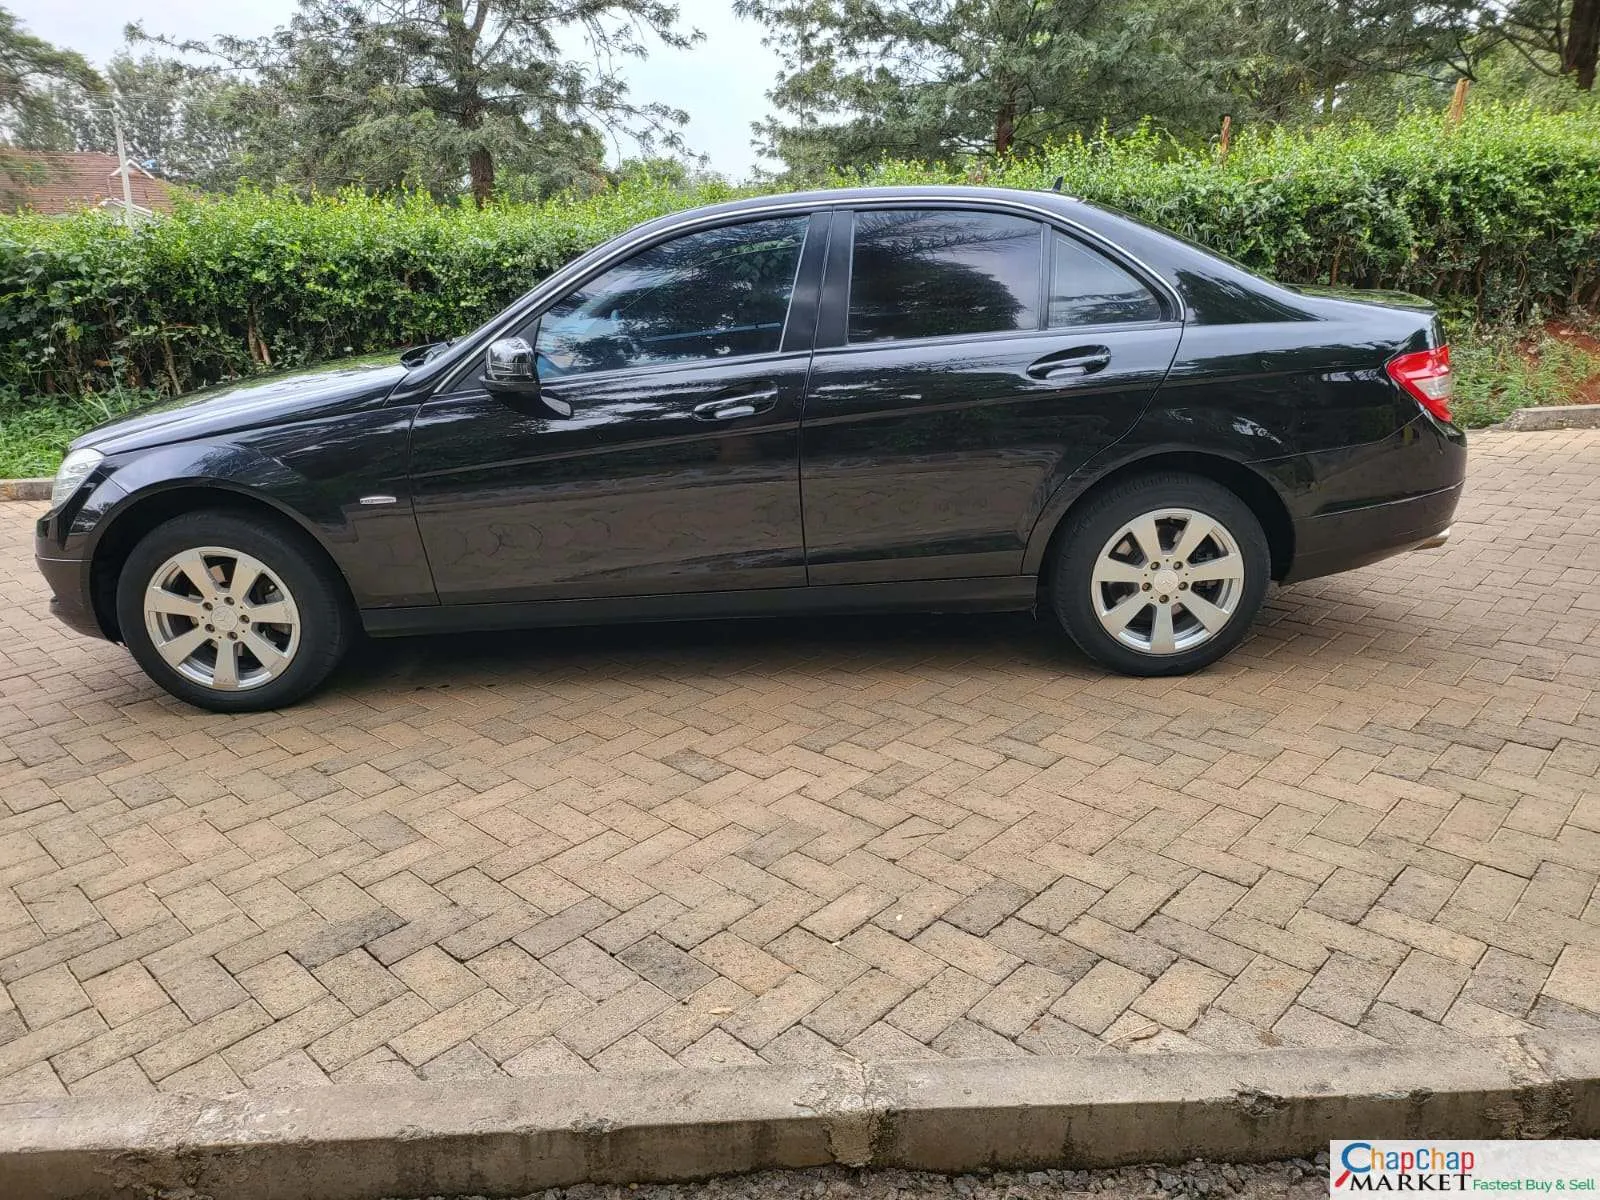 Mercedes Benz C200 for sale in Kenya 🔥 You Pay 30% DEPOSIT Trade in OK EXCLUSIVE Hire Purchase